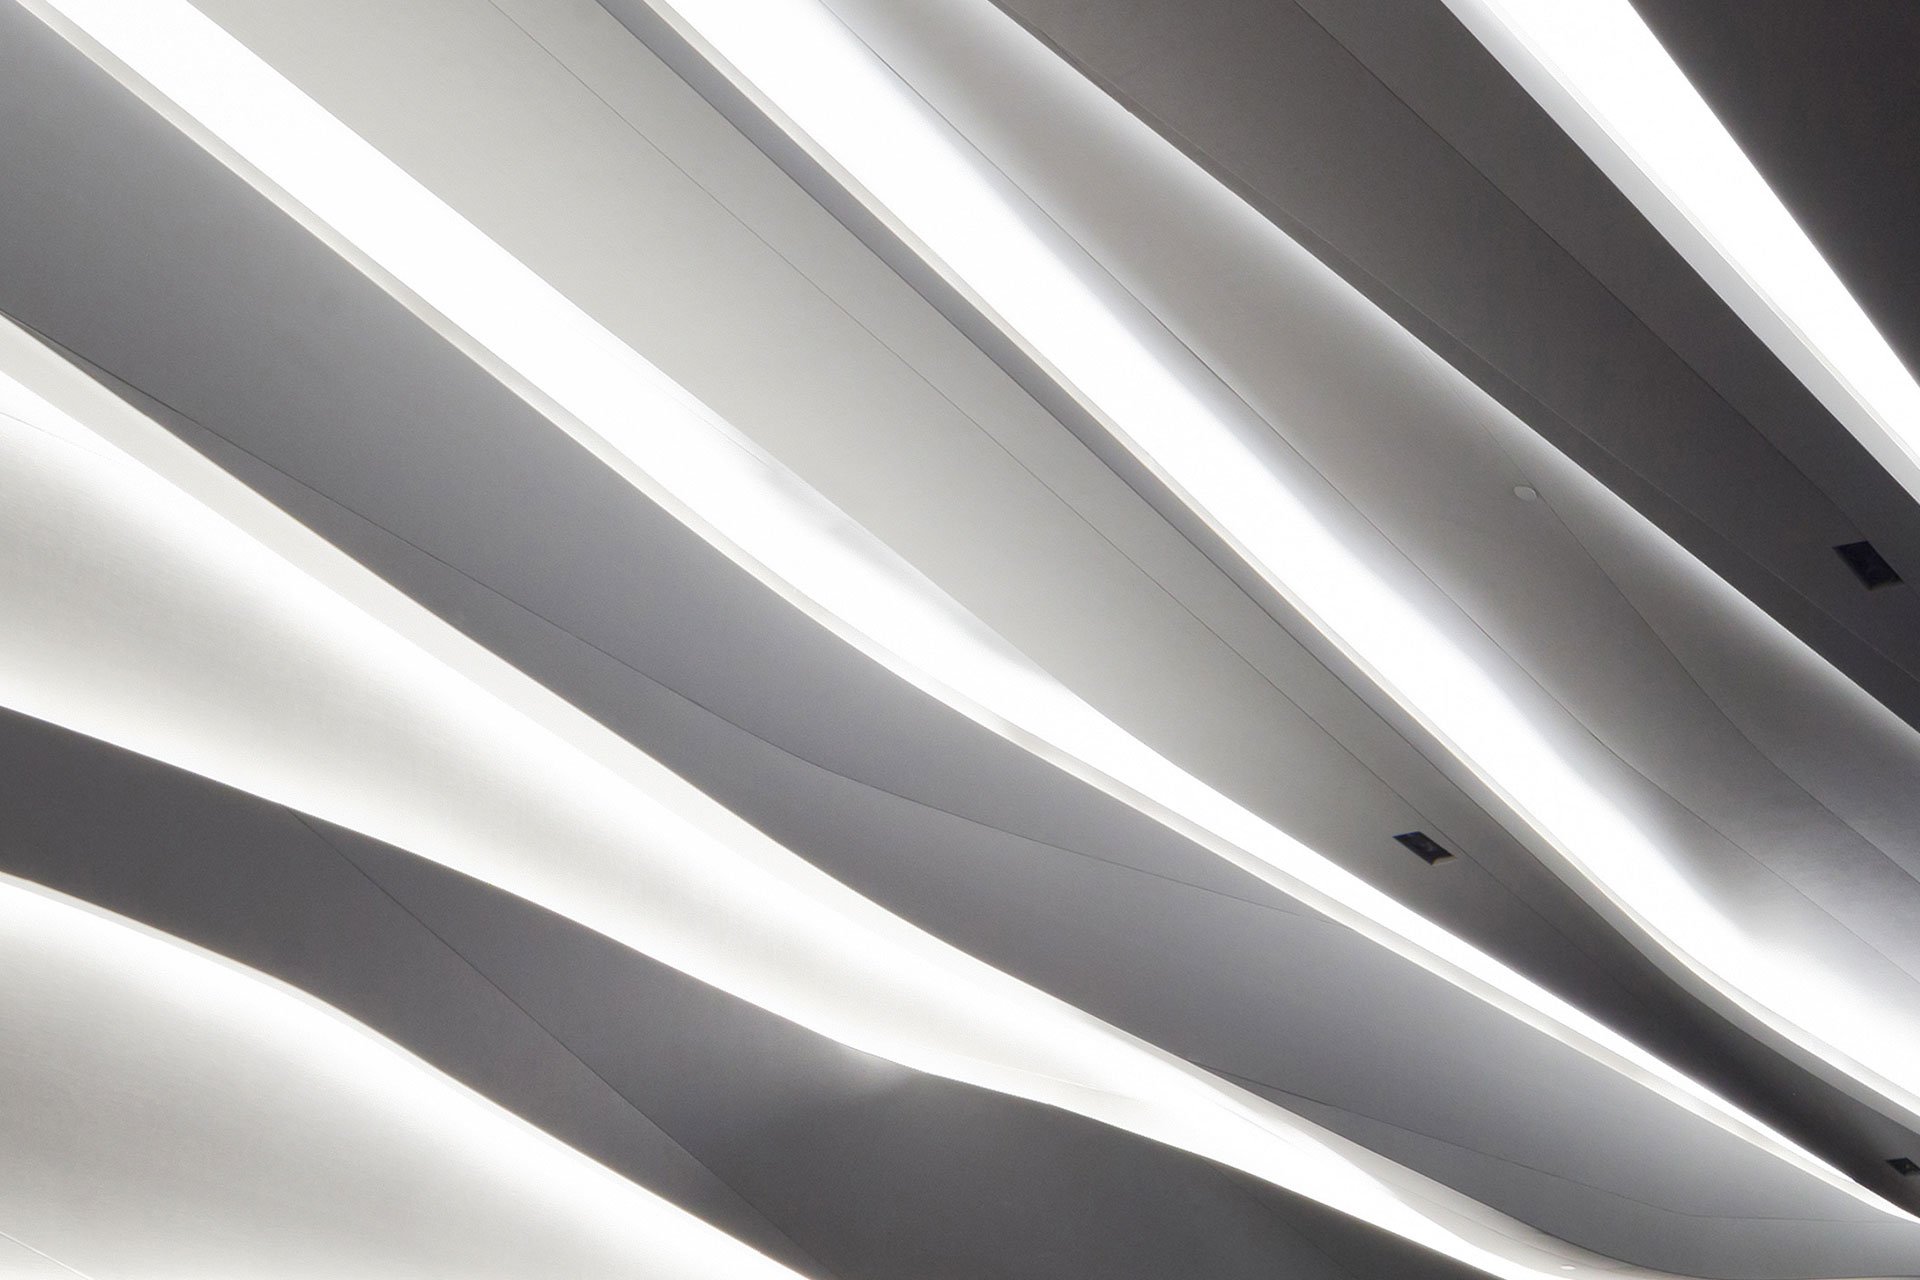 Perot Museum of Nature and Science ceiling architectural design lighting Office For Visual Interaction